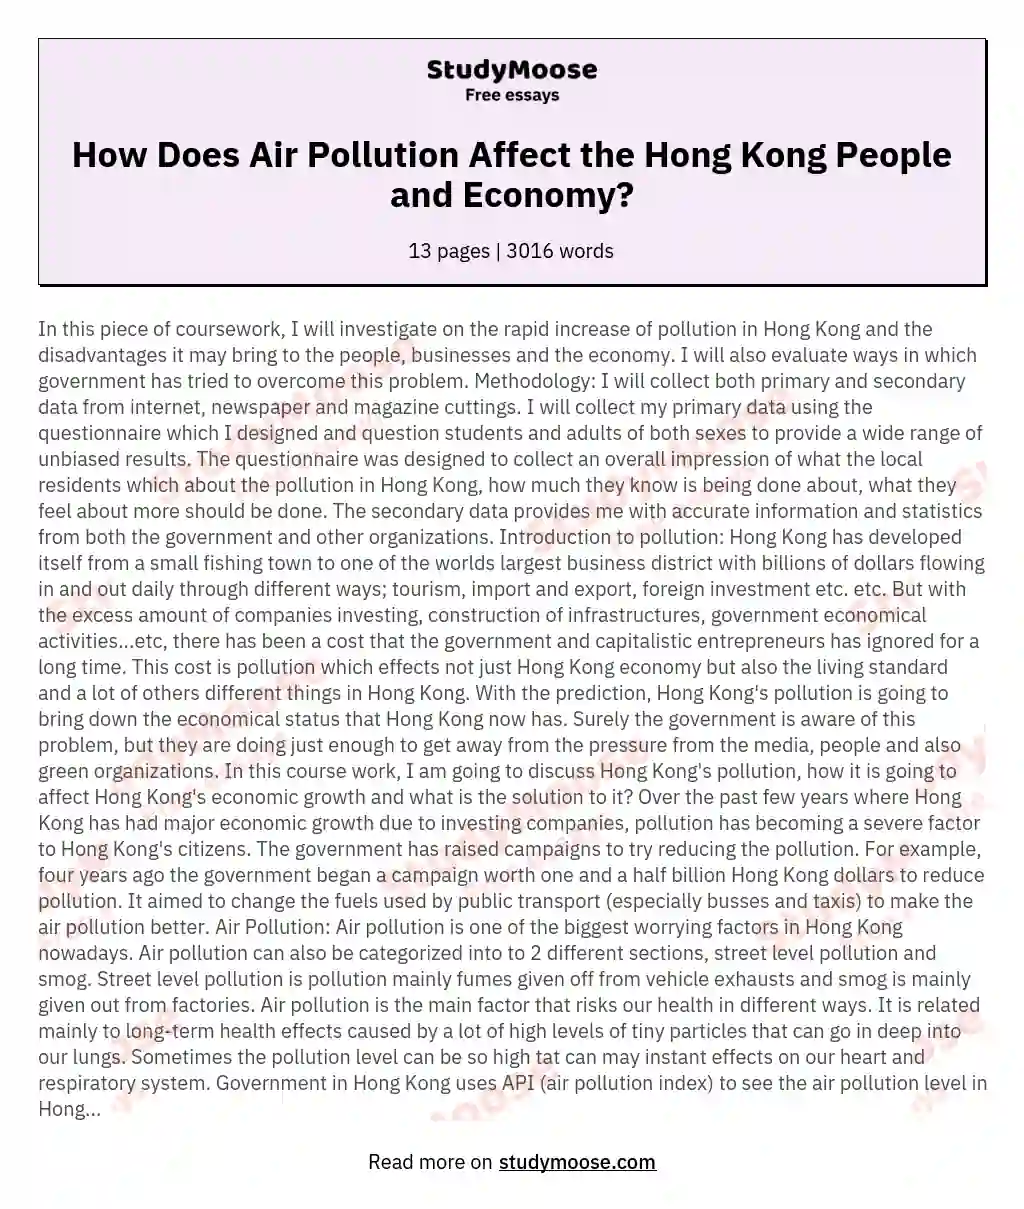 How Does Air Pollution Affect the Hong Kong People and Economy? essay